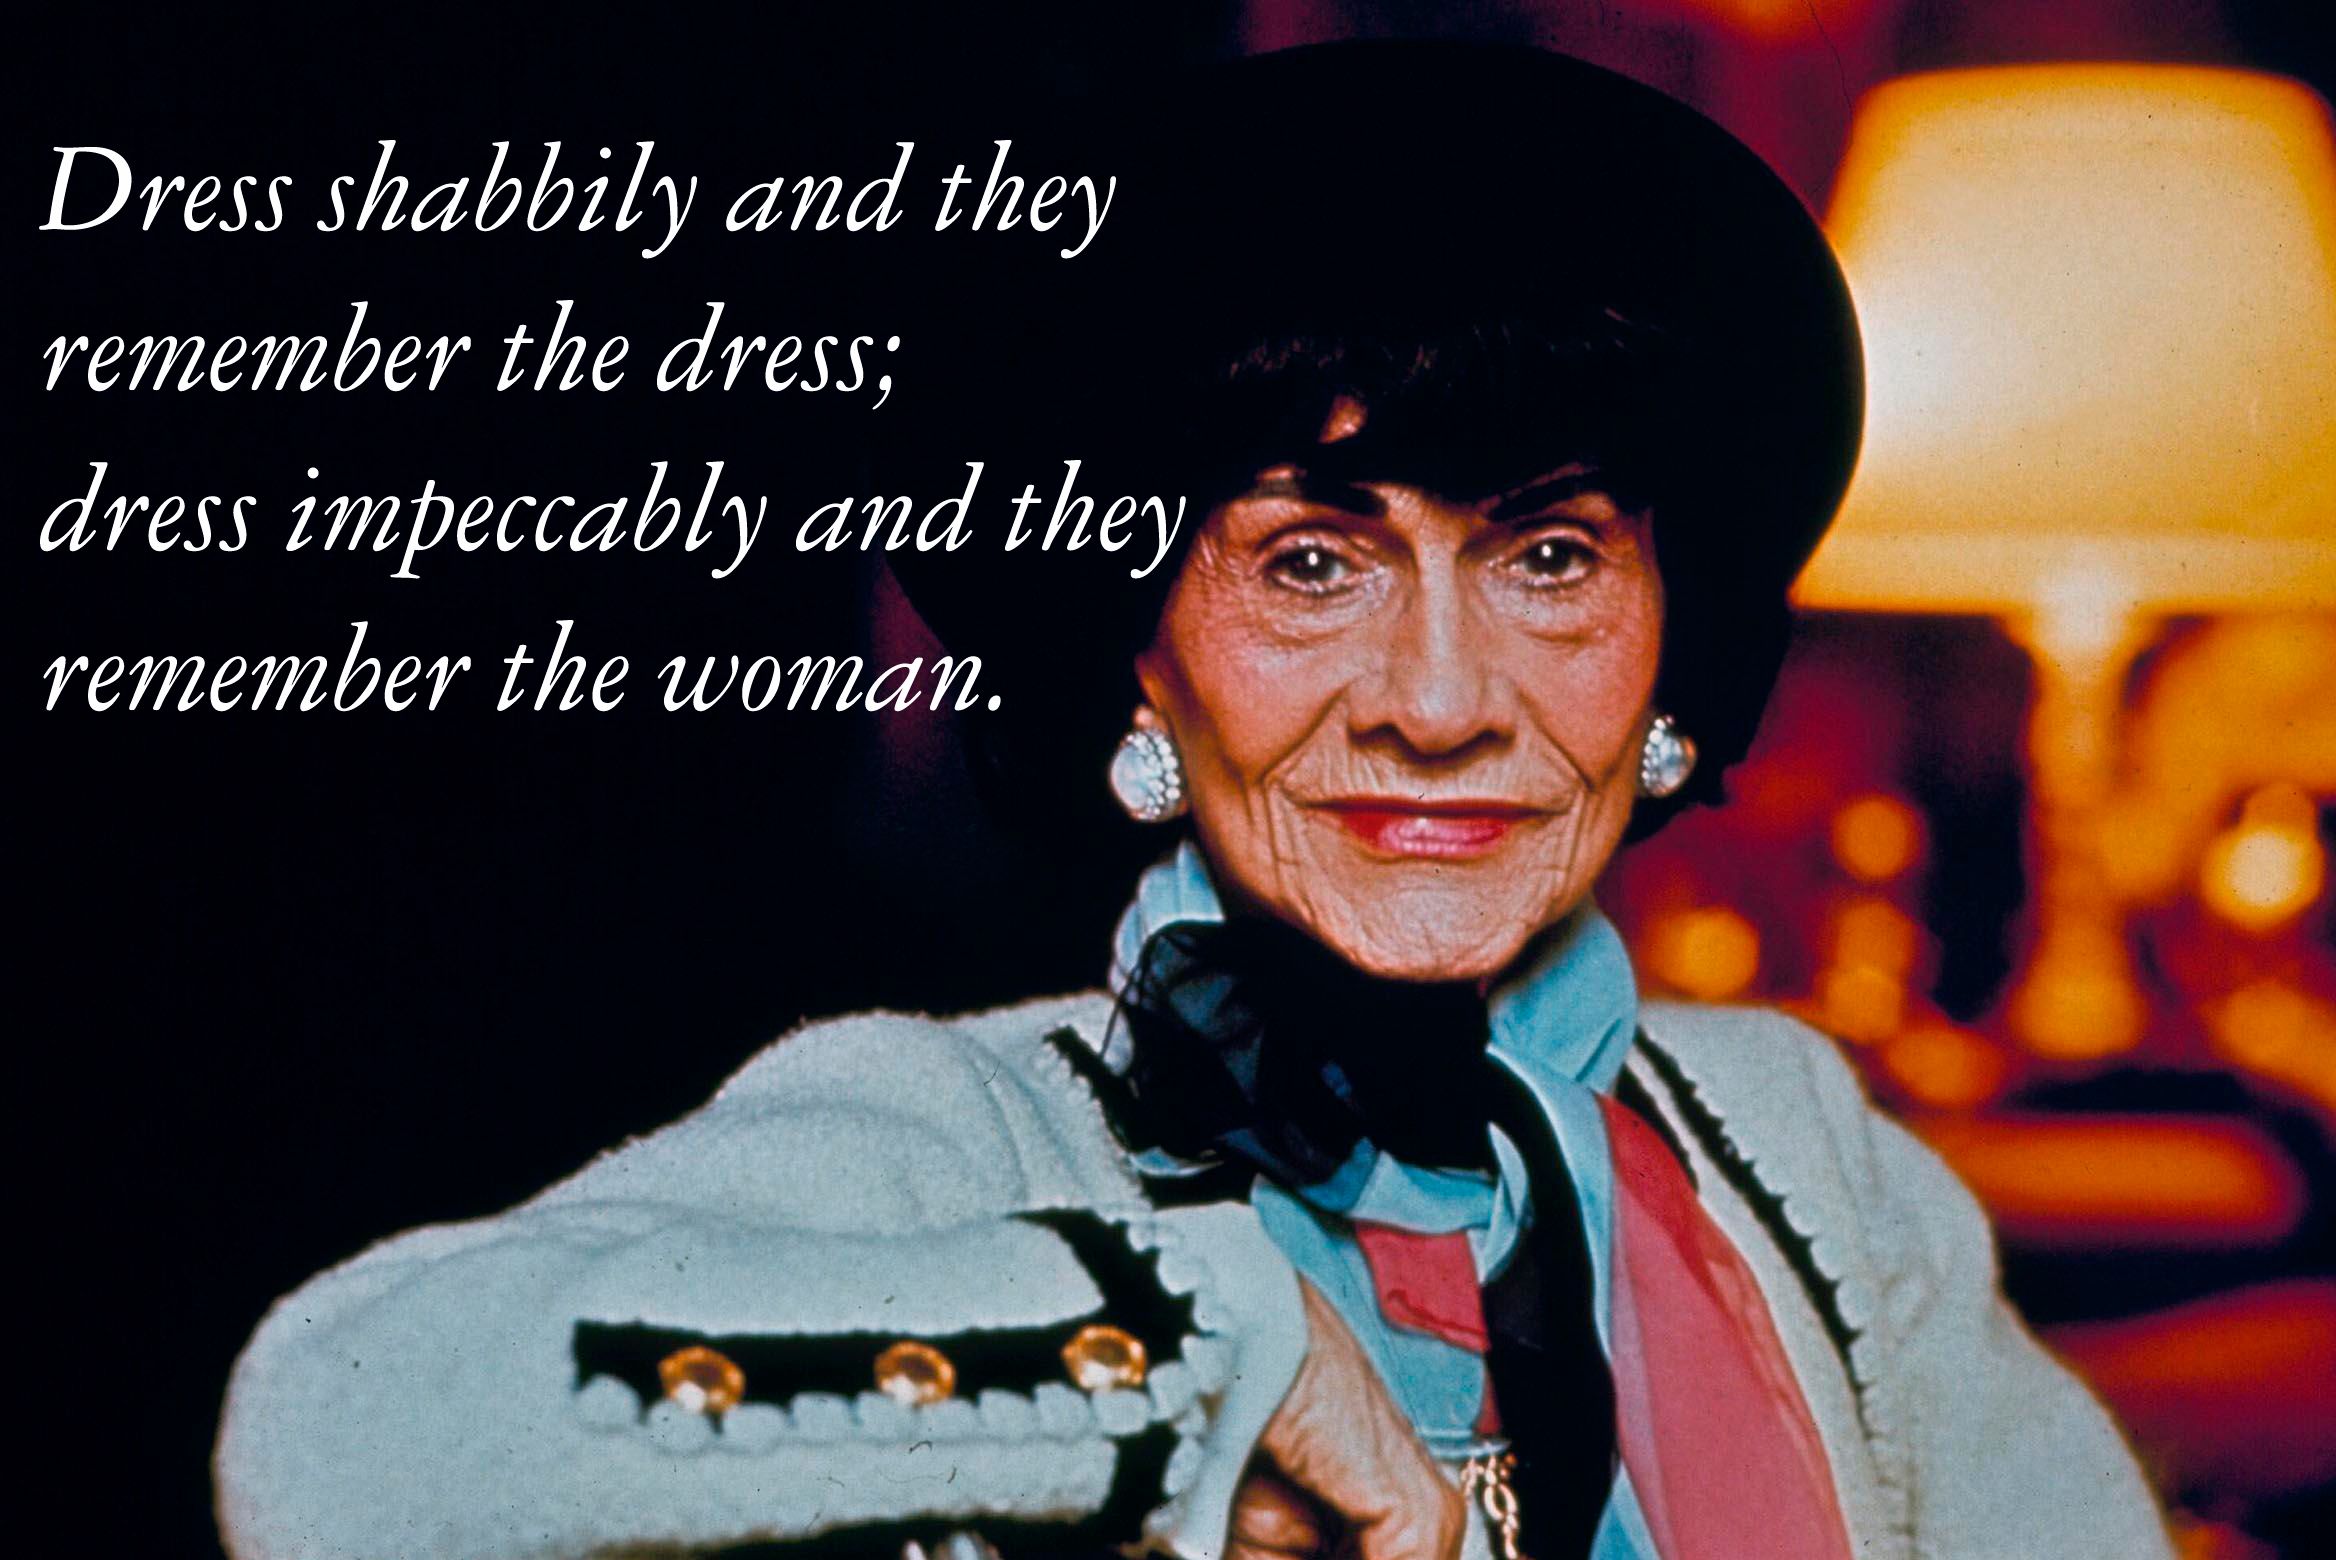 AD Remembers Coco Chanel's Iconic Style